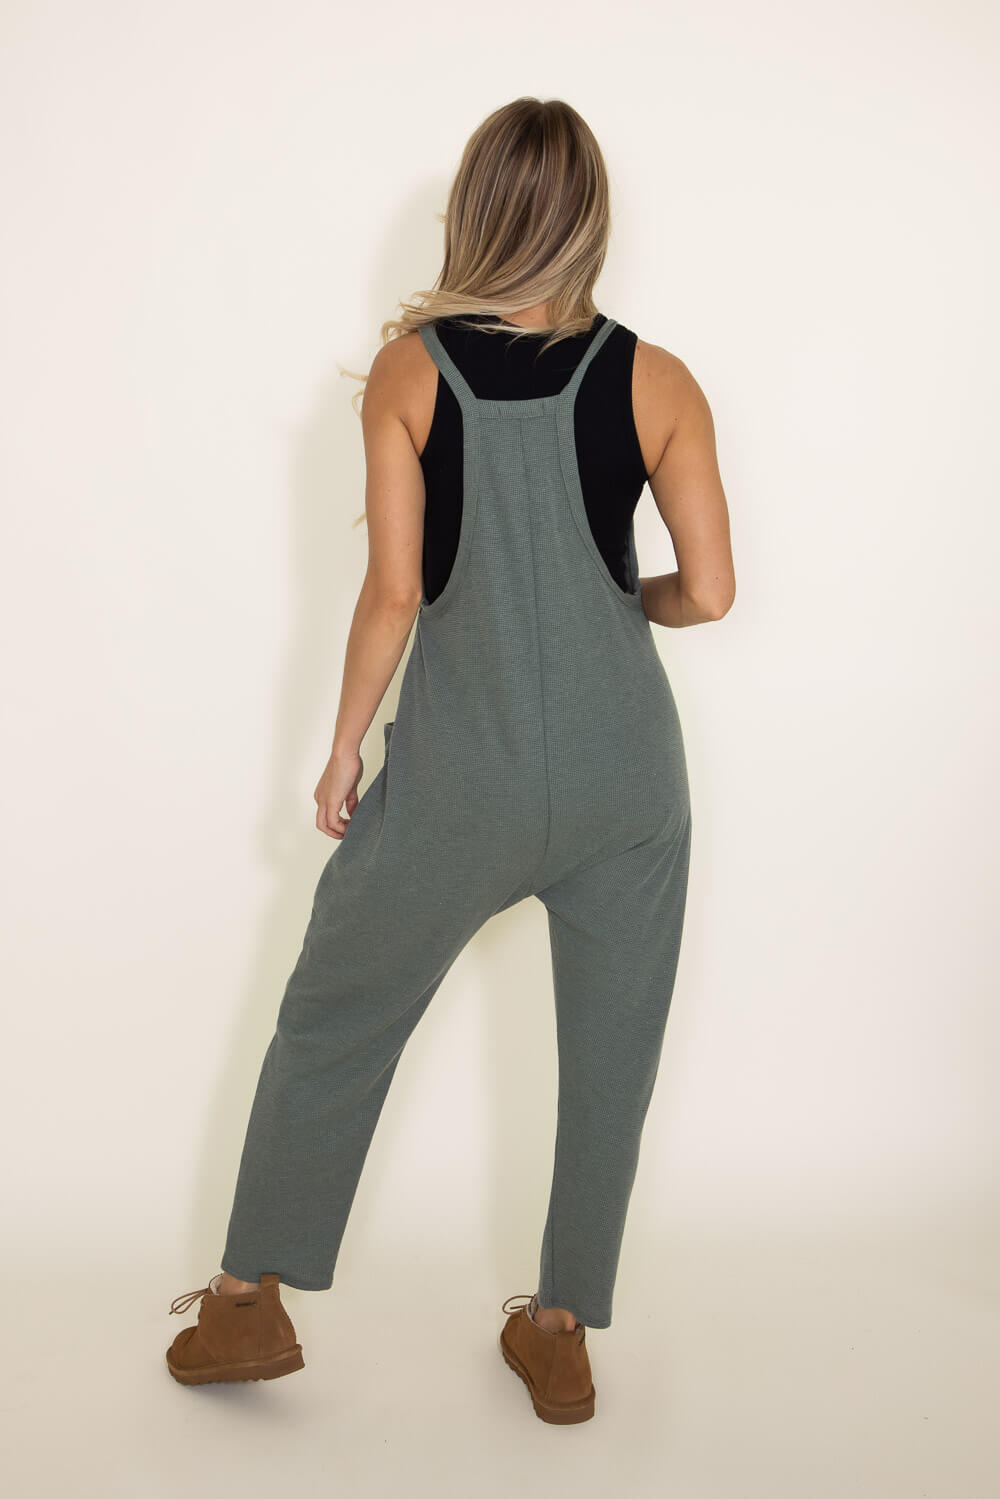 Relaxed Camisole Onesie Jumpsuit for Women in Green